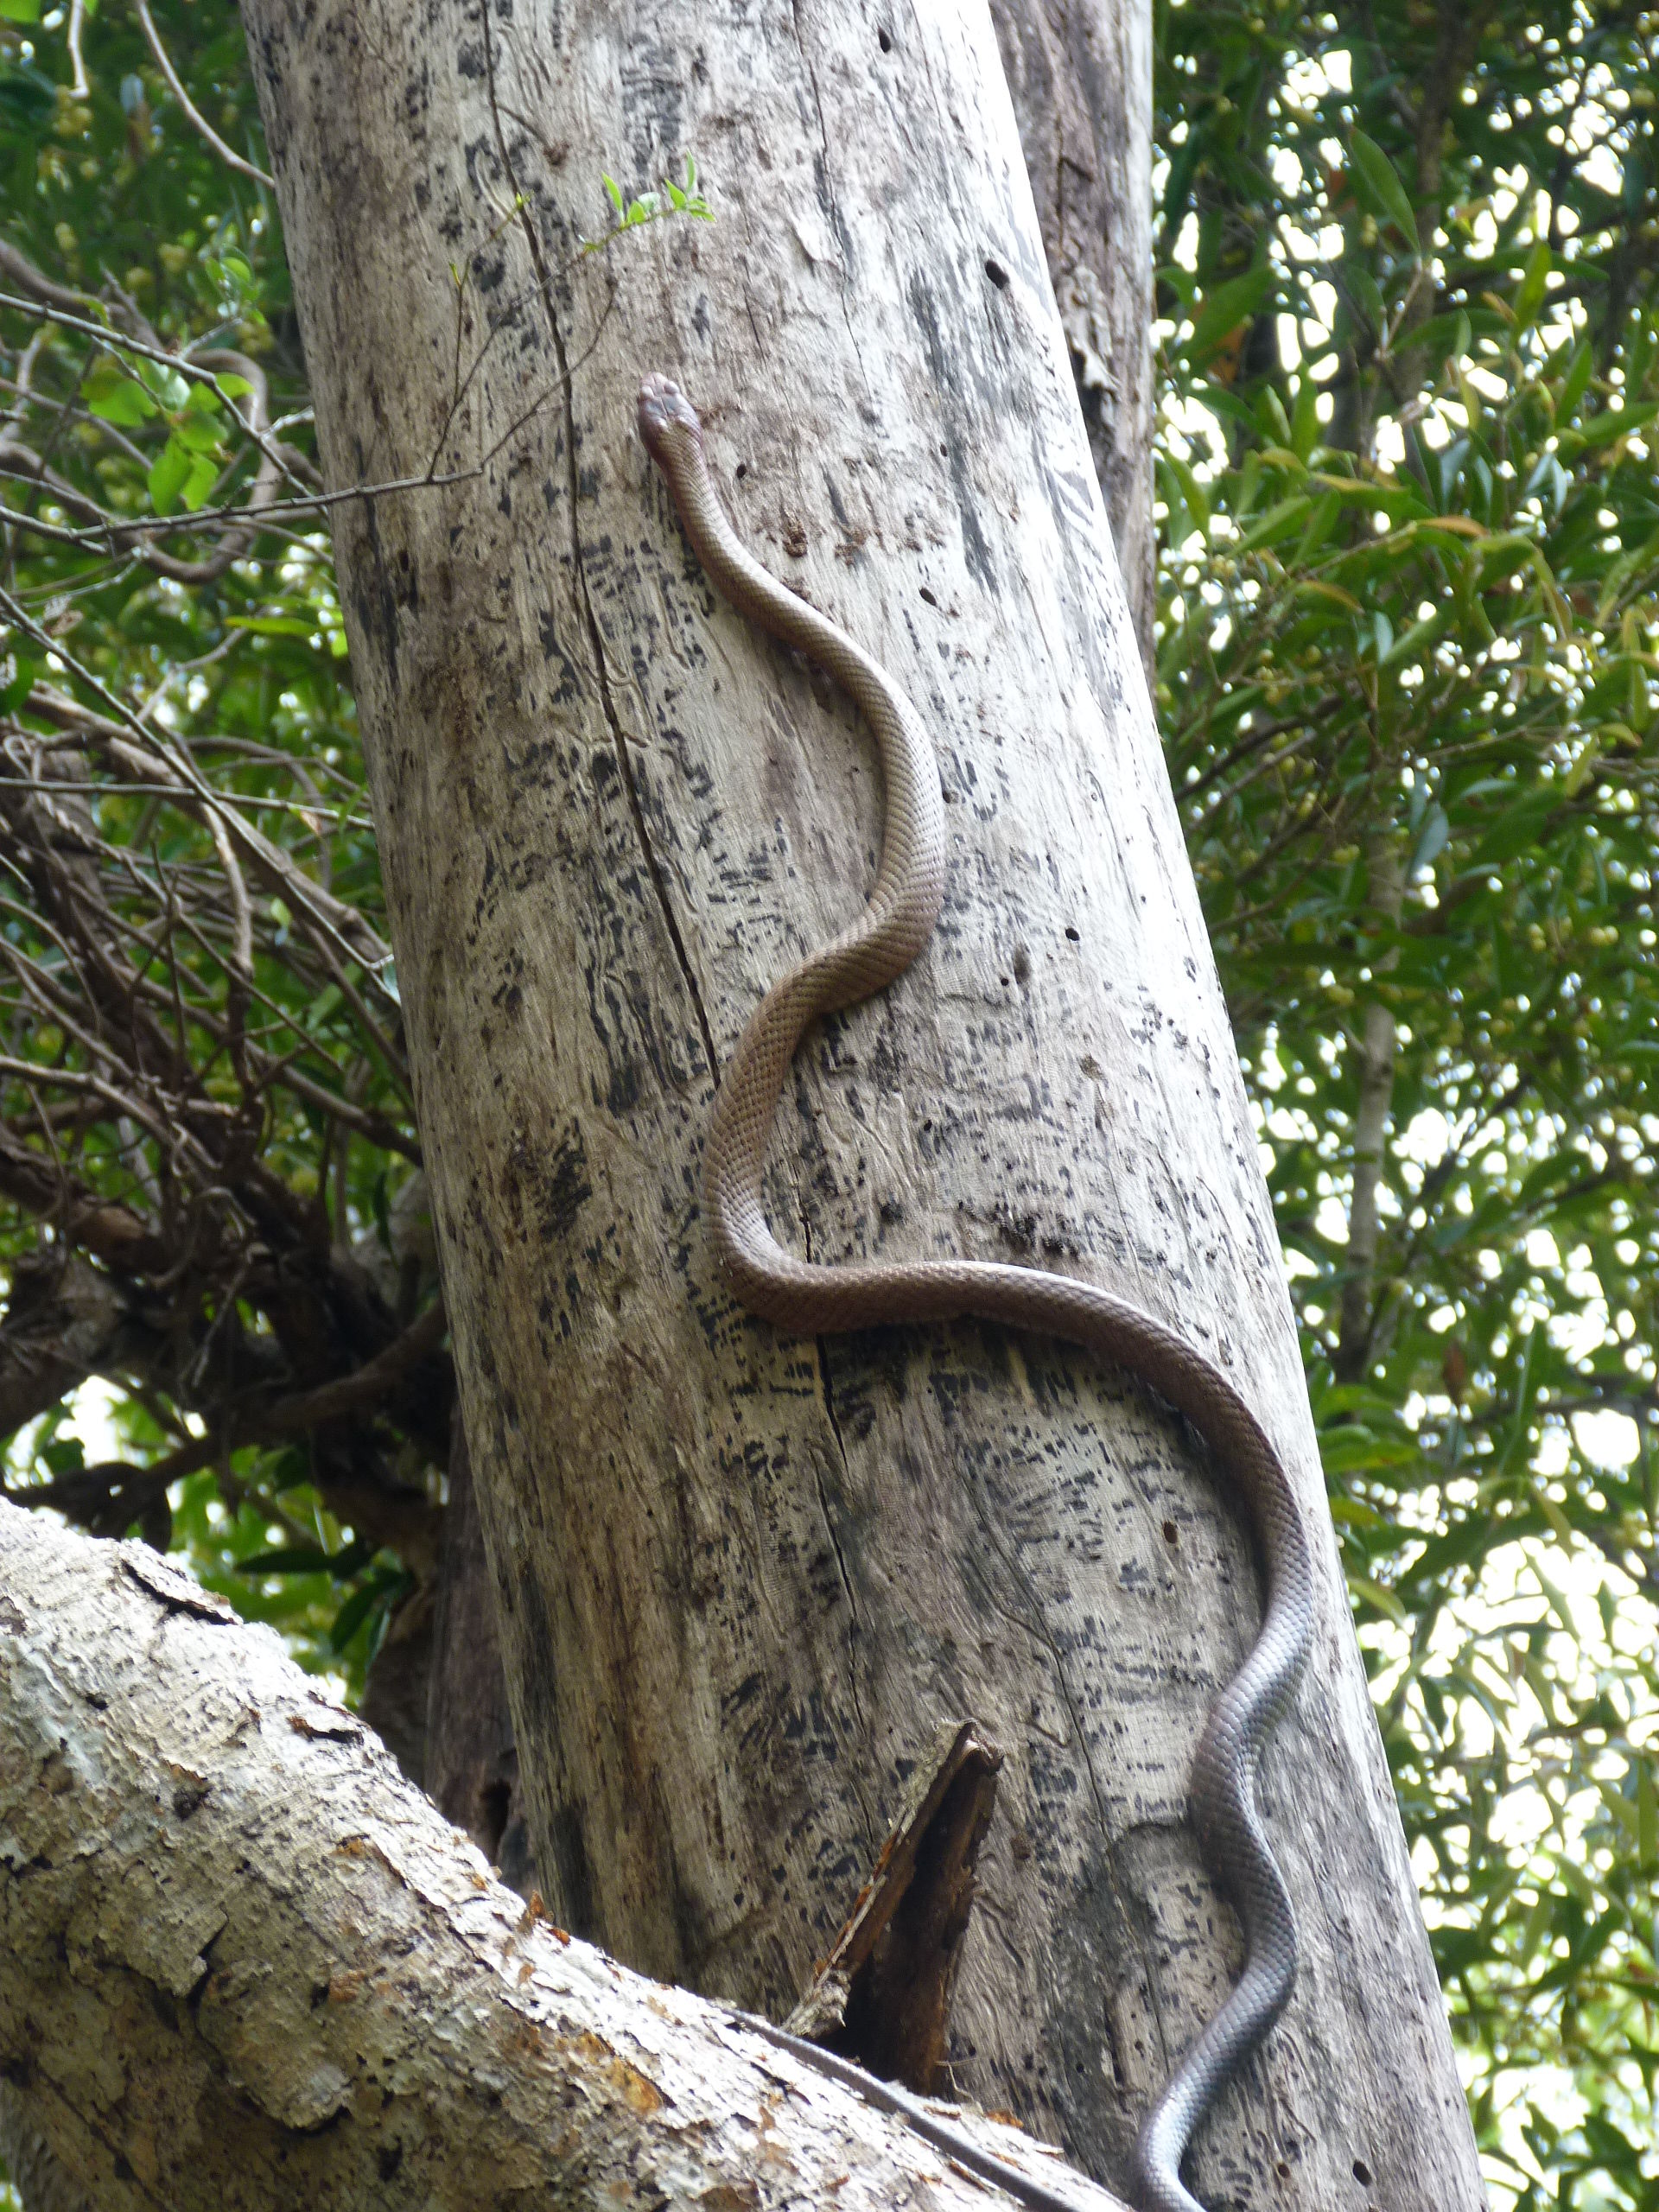 Snake on the tree